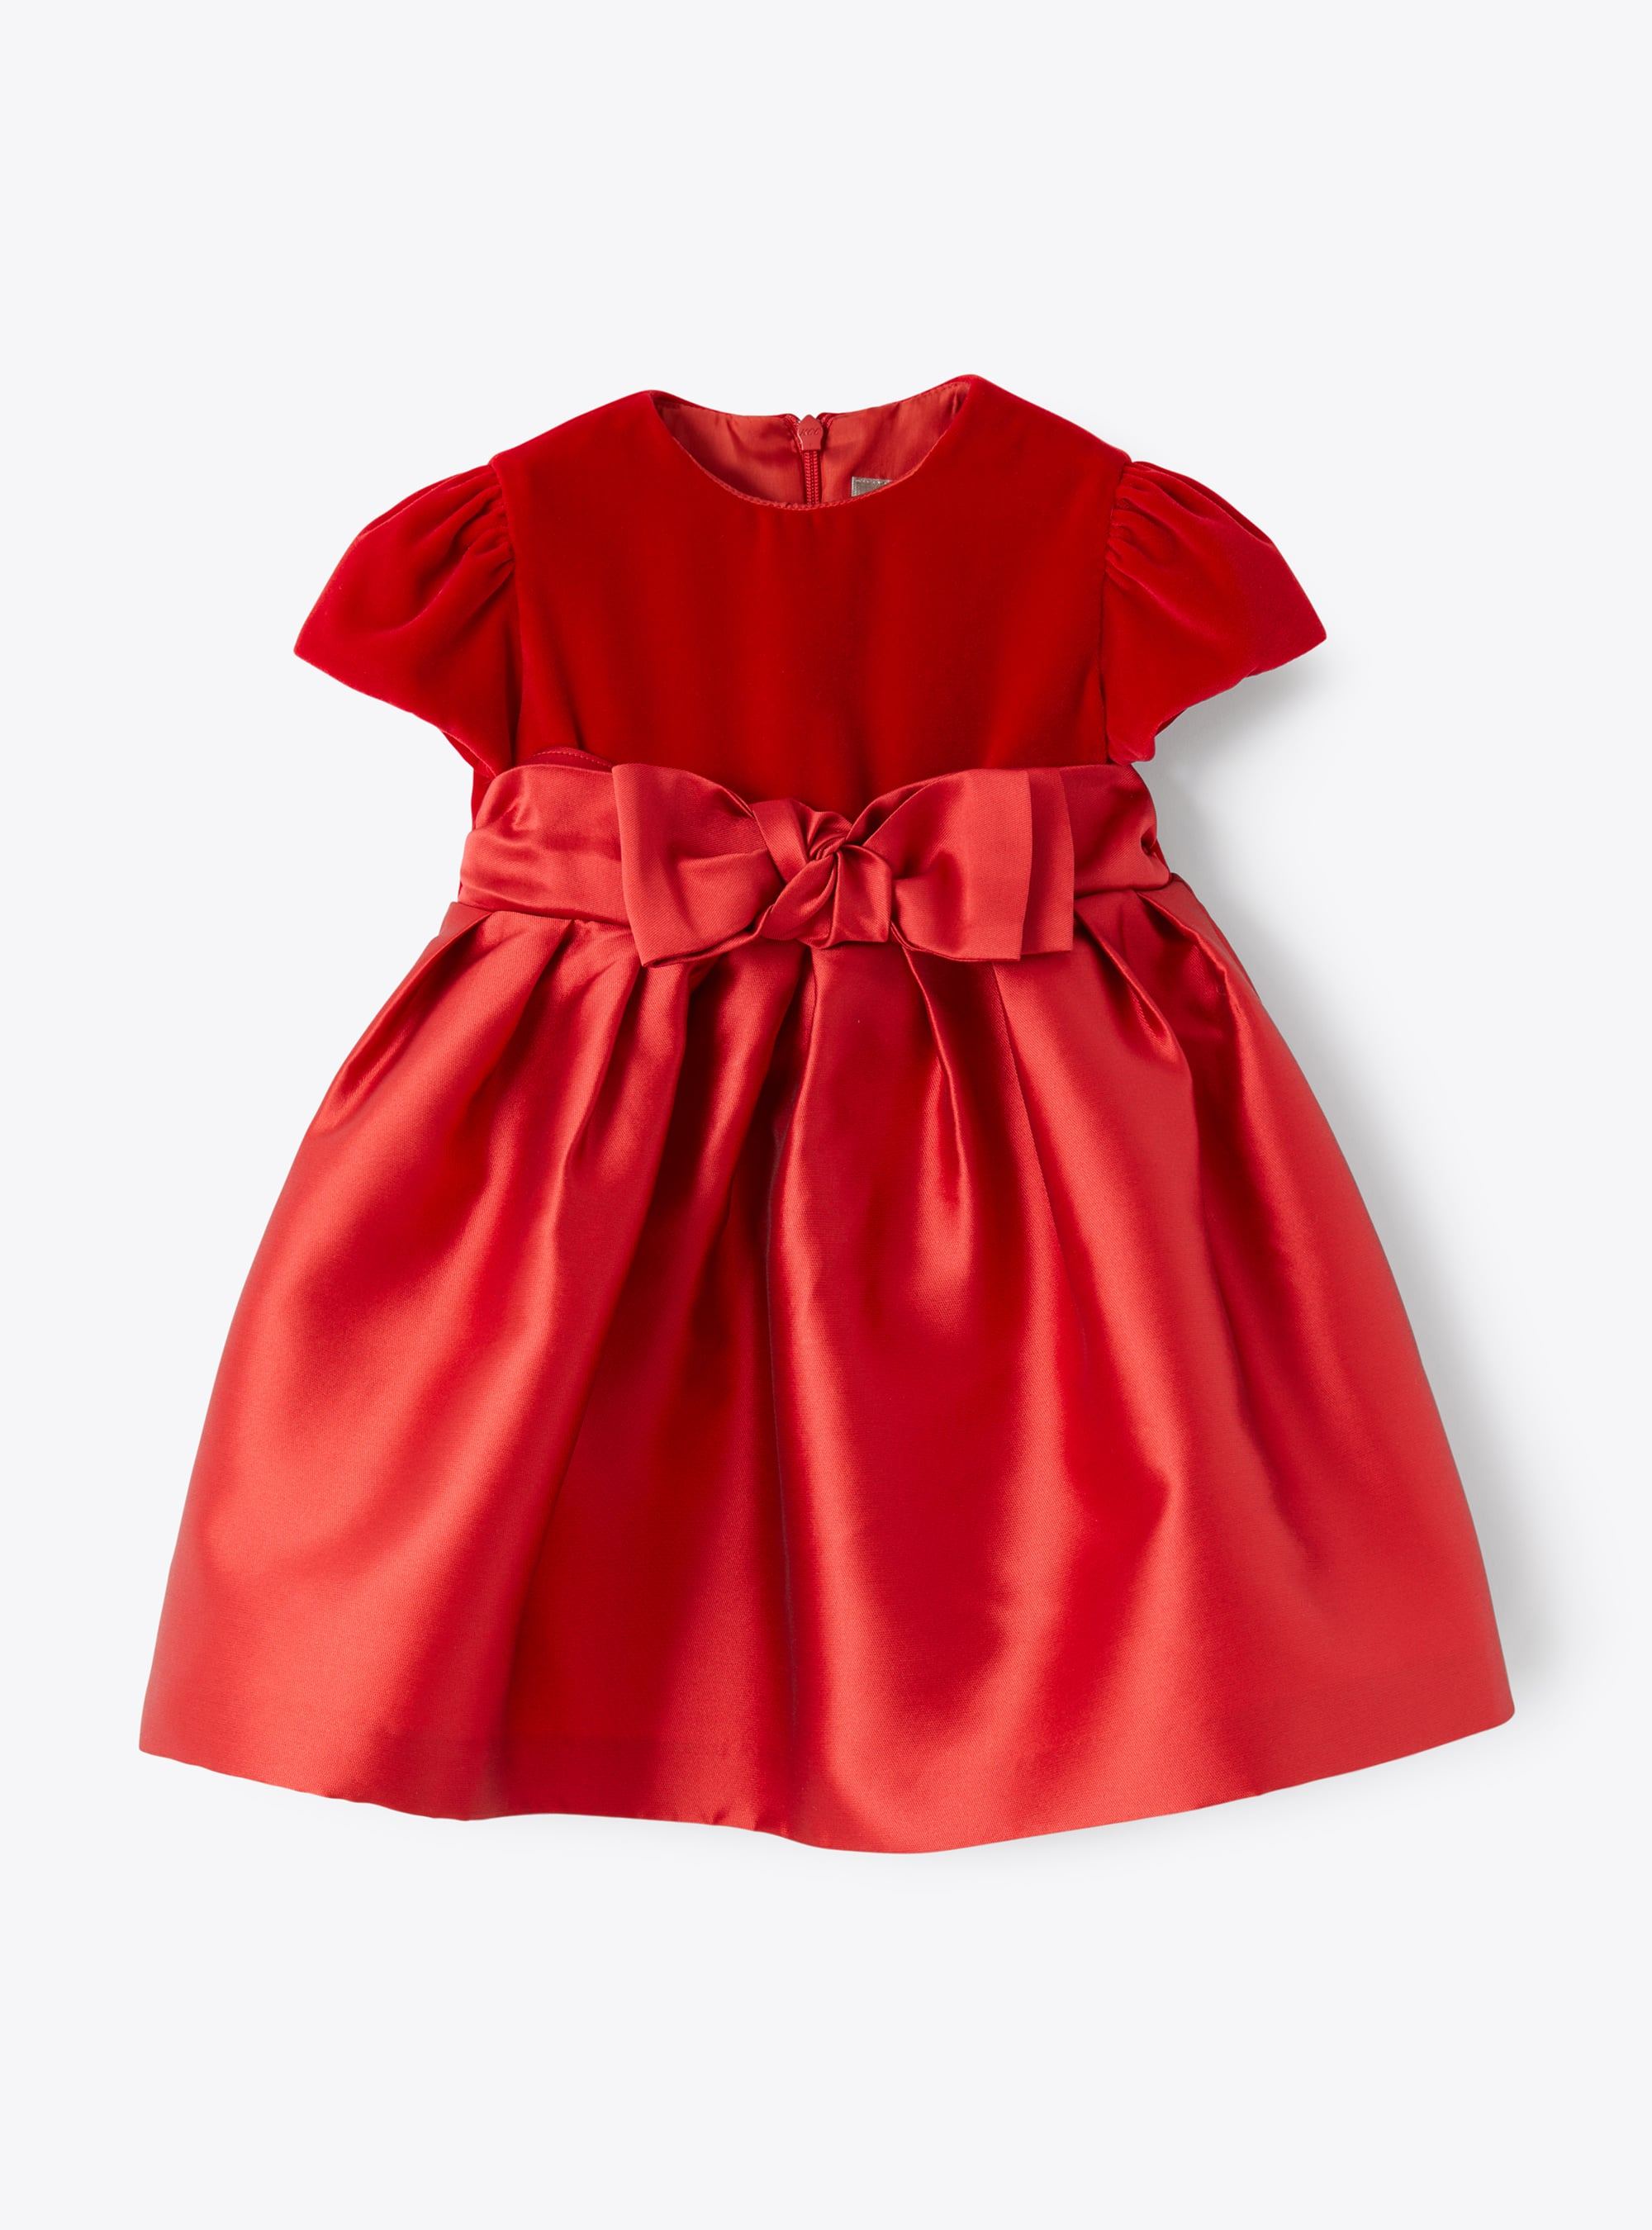 Dress in poppy red with bow embellishment - Dresses - Il Gufo